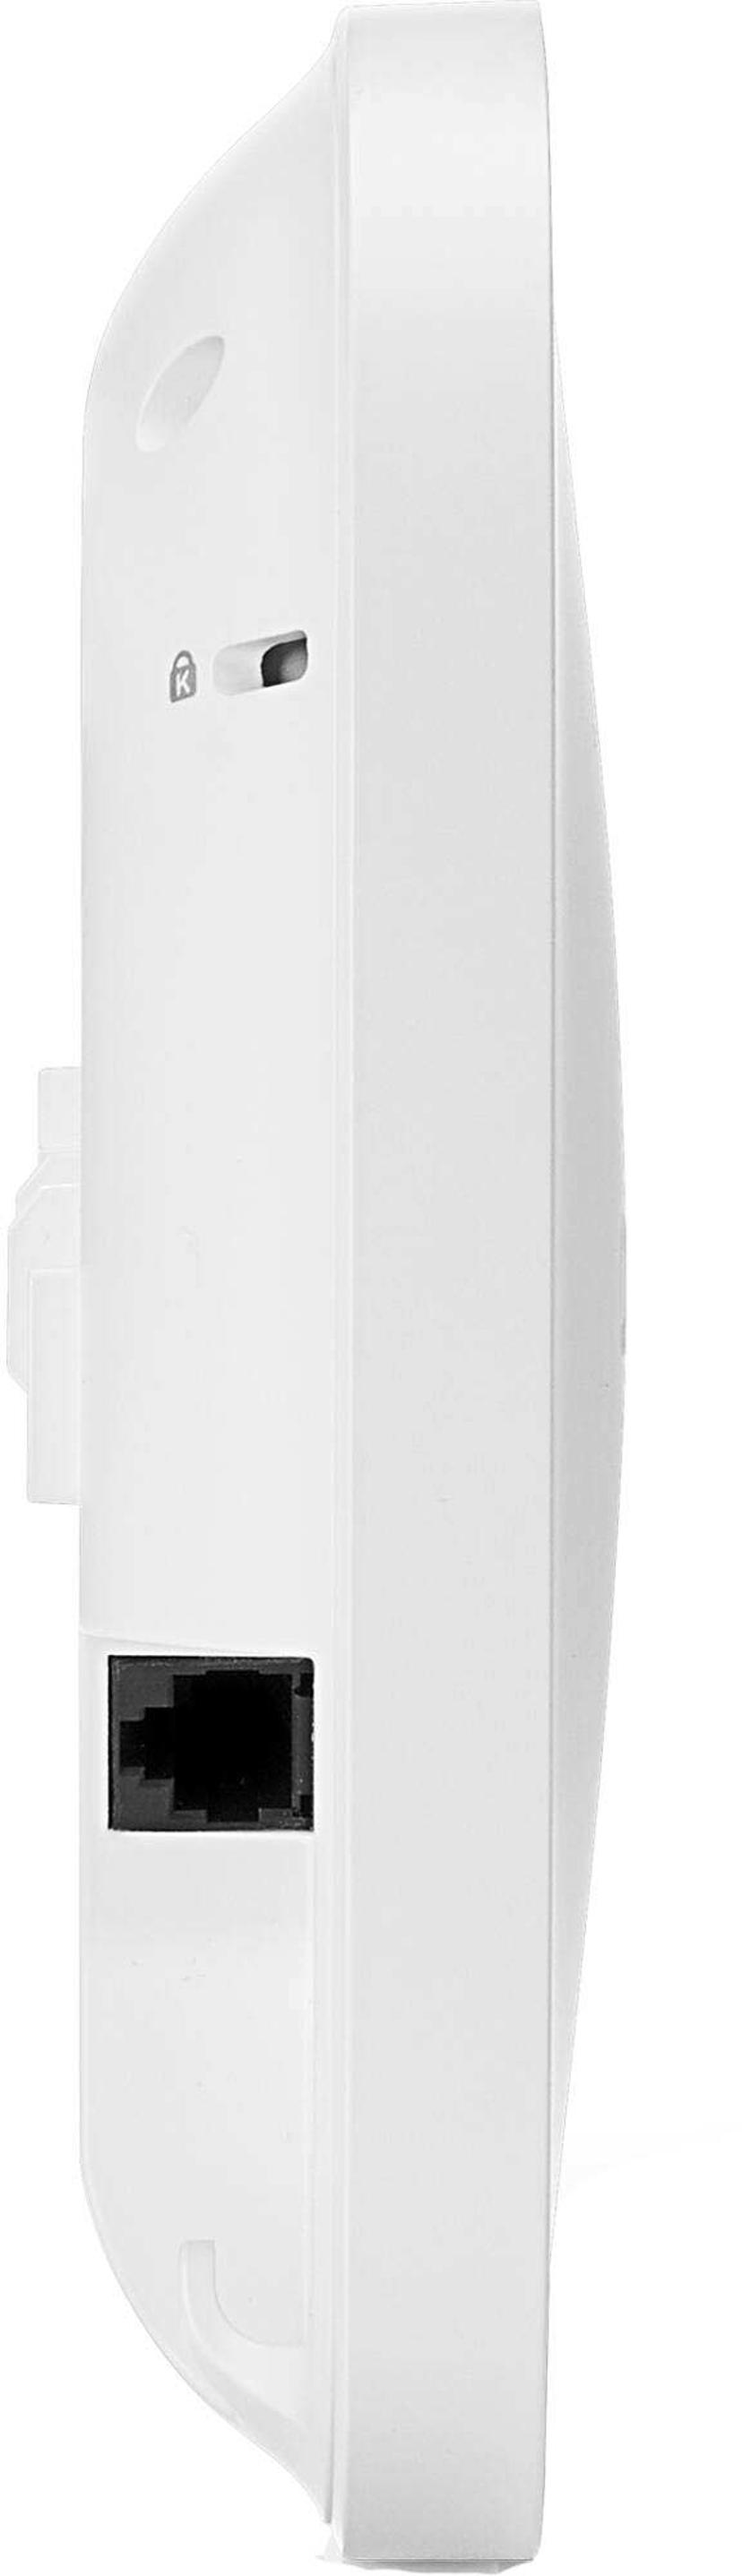 HPE Networking Instant On AP22 Access Point bundle with PSU 12V/18W